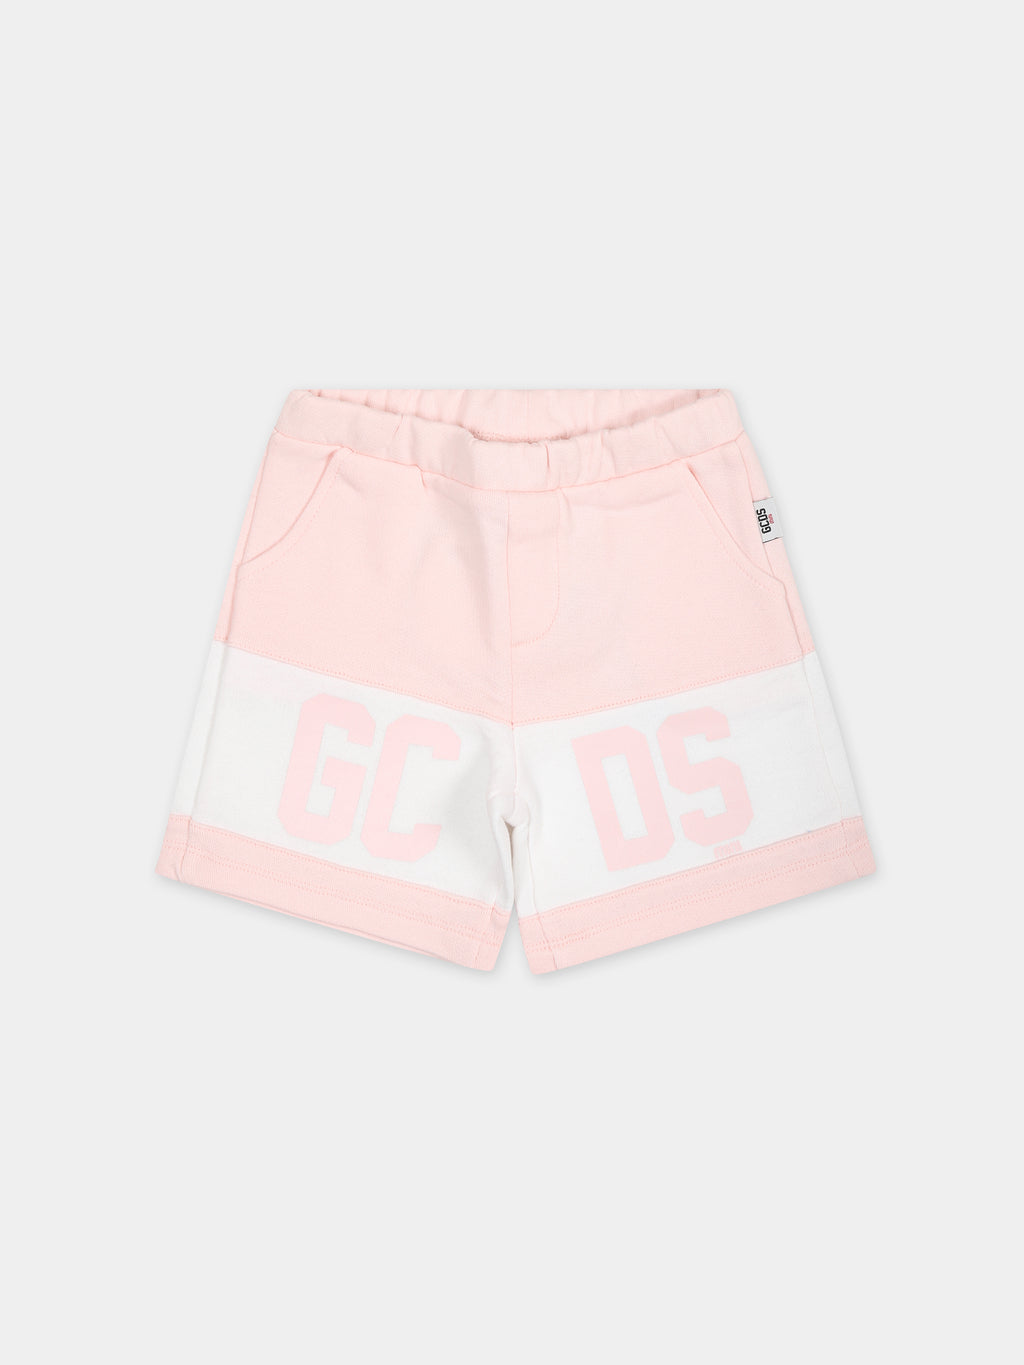 Pink sports shorts for babies with logo